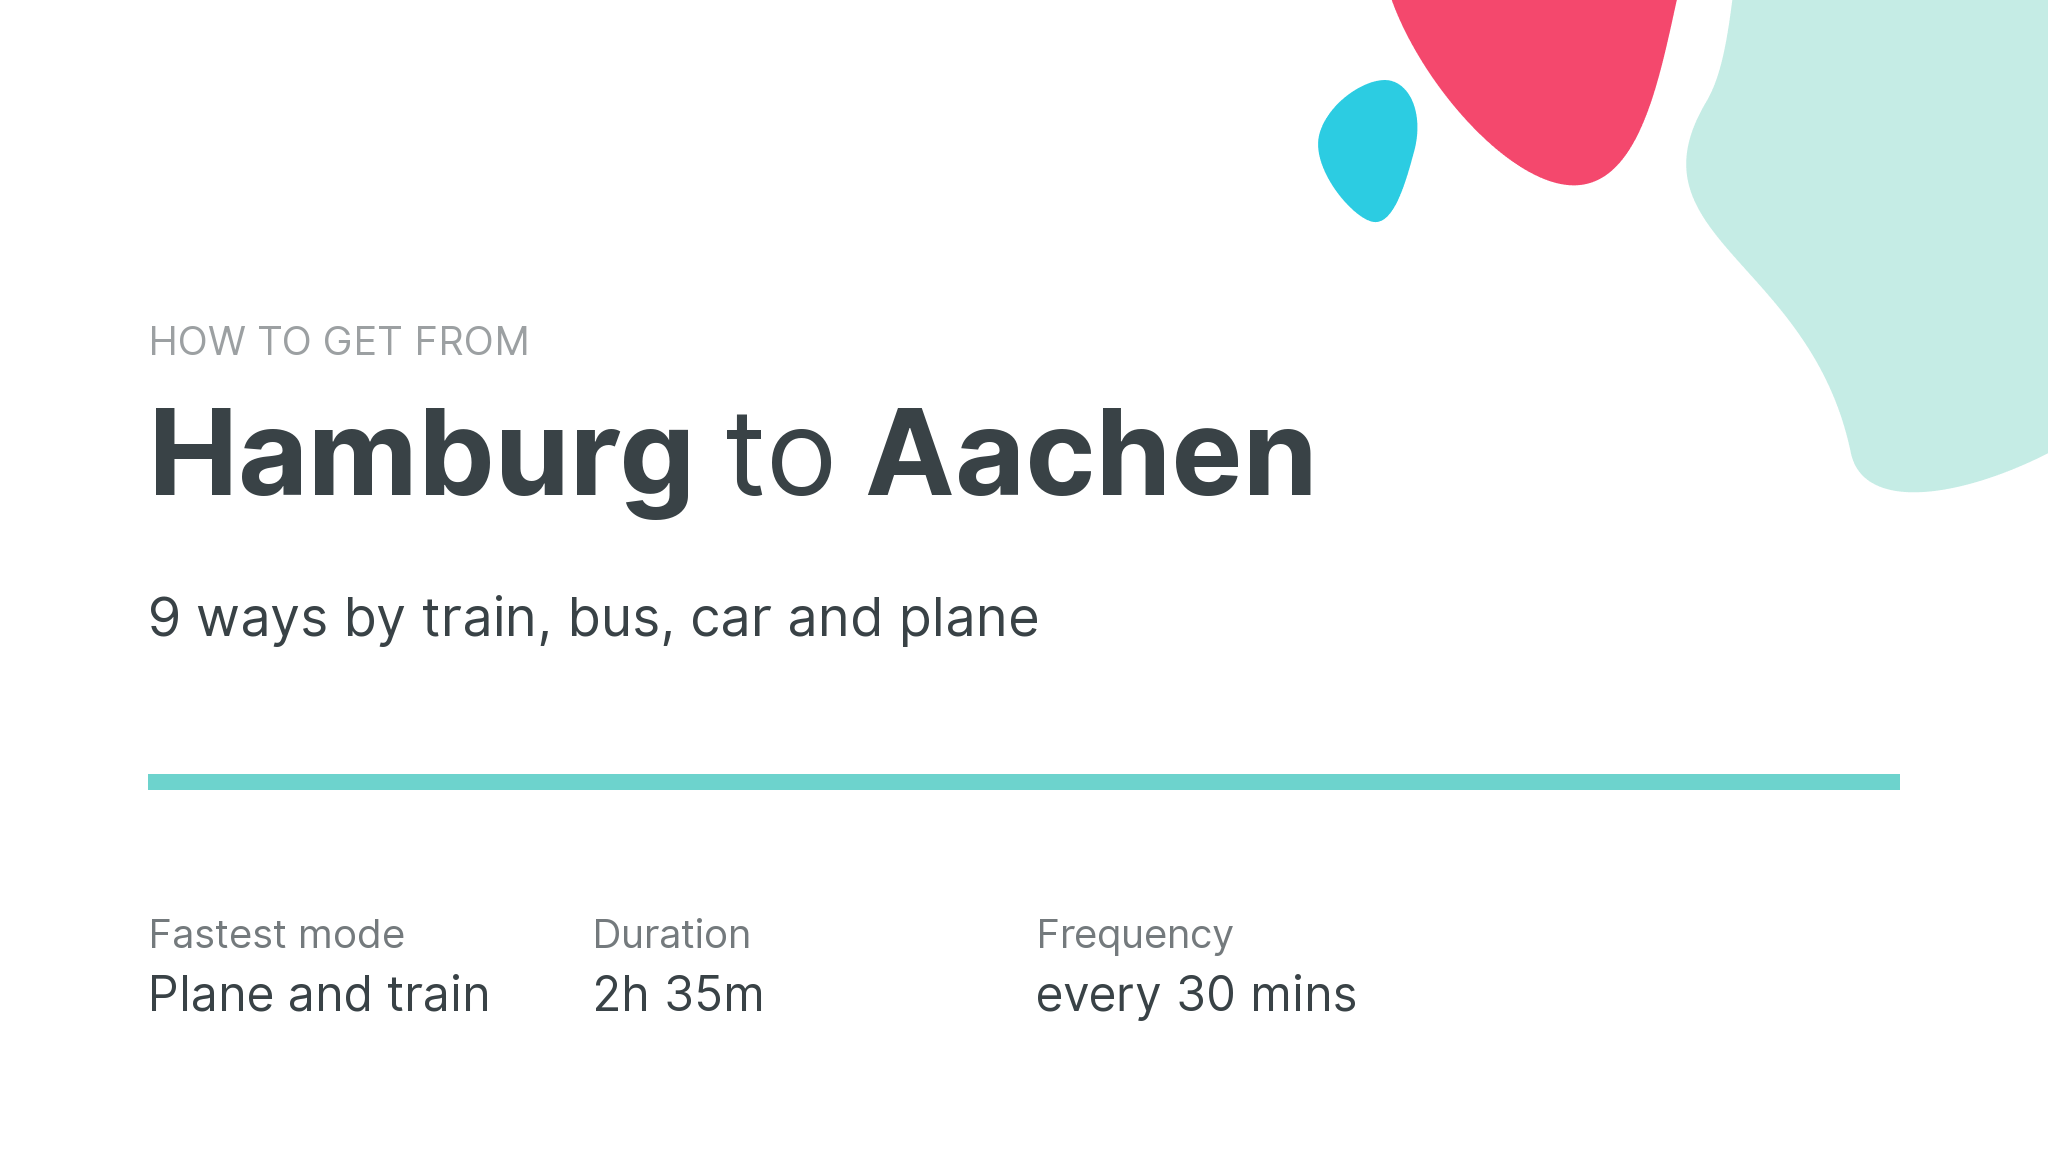 How do I get from Hamburg to Aachen